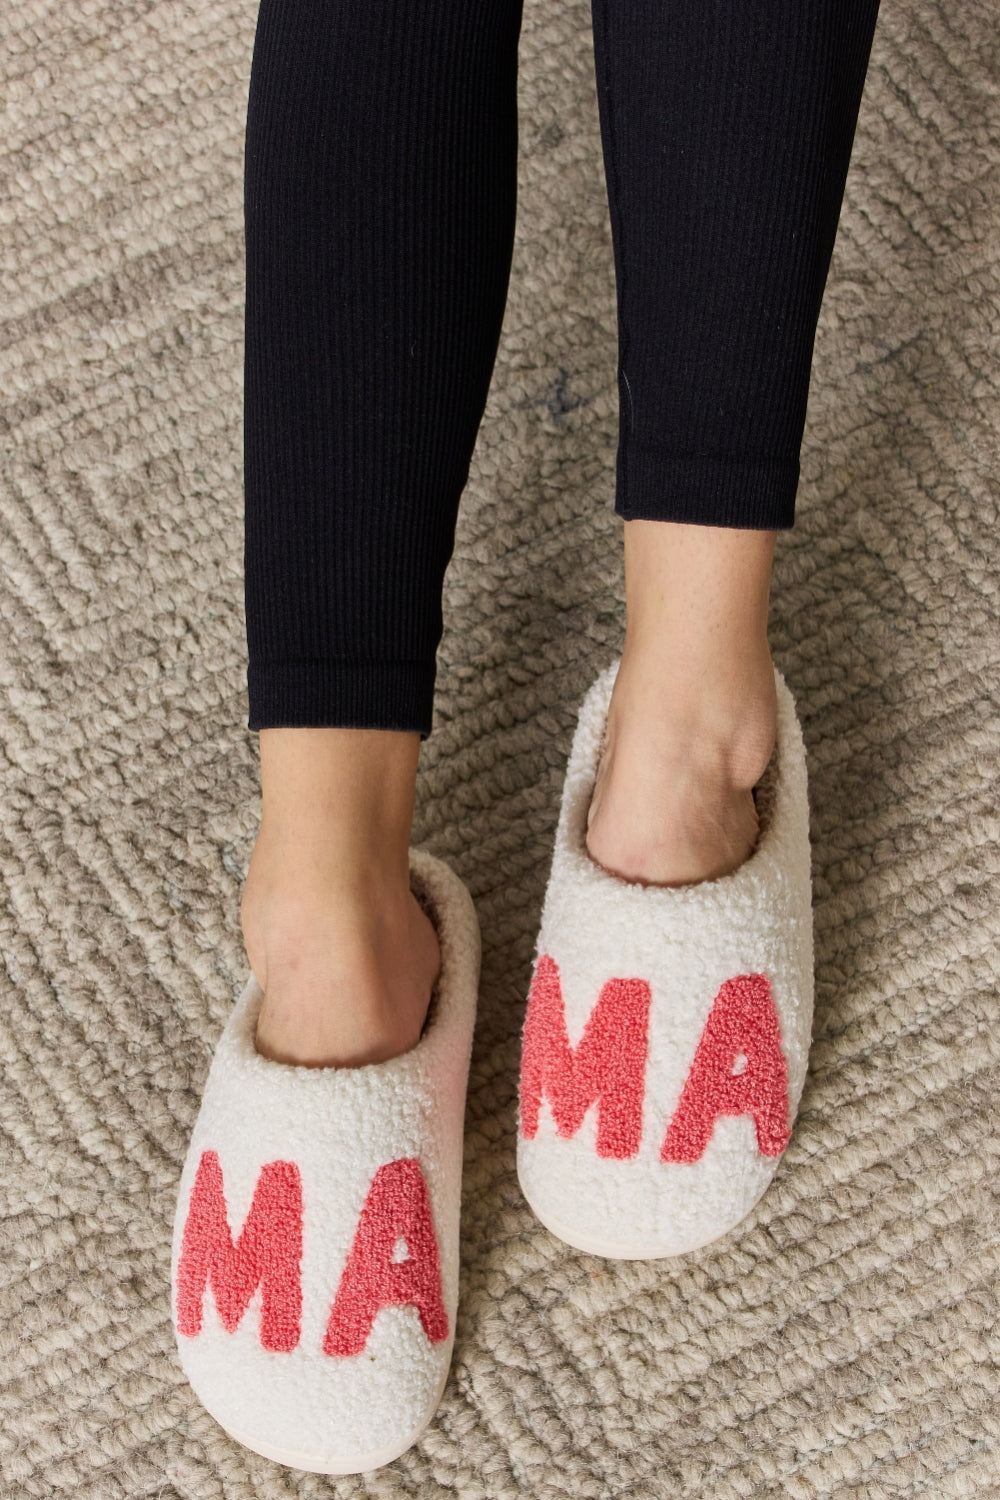 Vetements Are Bringing Back Your Childhood Teddy Bear Slippers